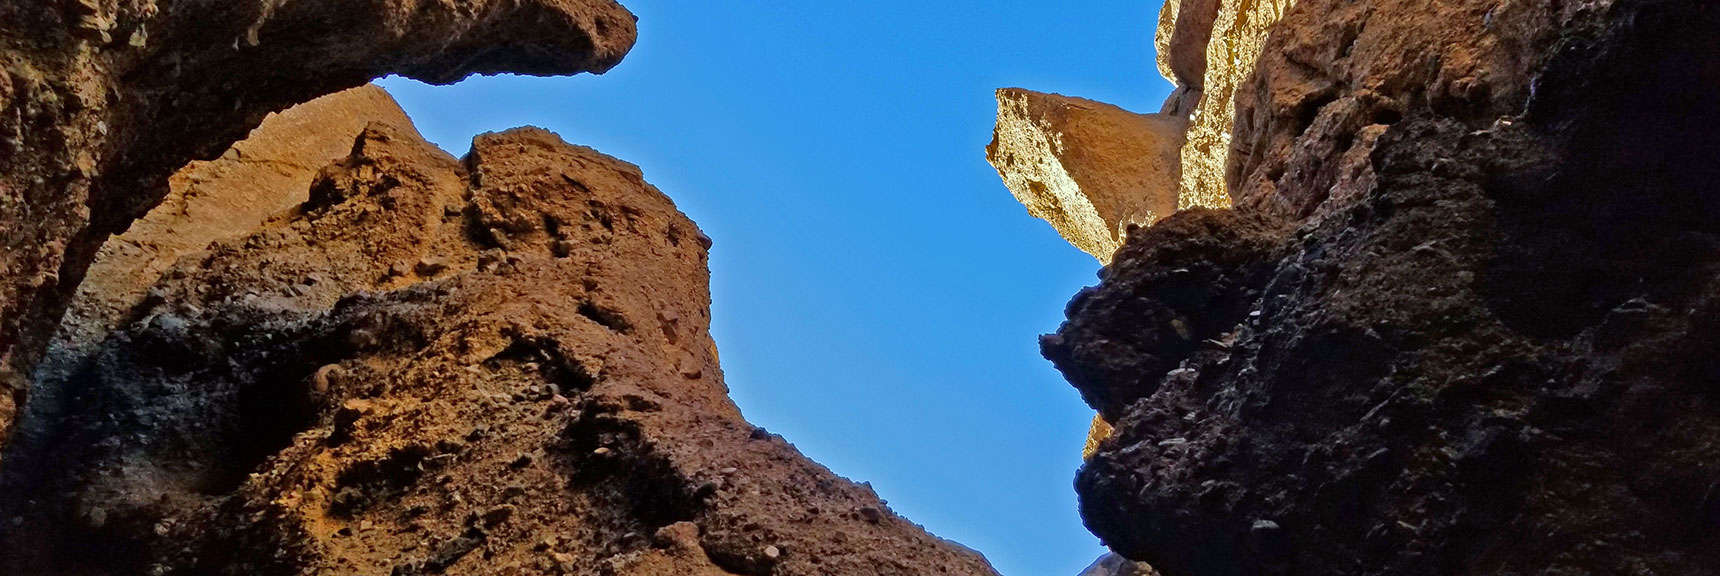 View Upward to the First Slot's Rim and Blue Sky | Sidewinder Canyon | Death Valley National Park, California